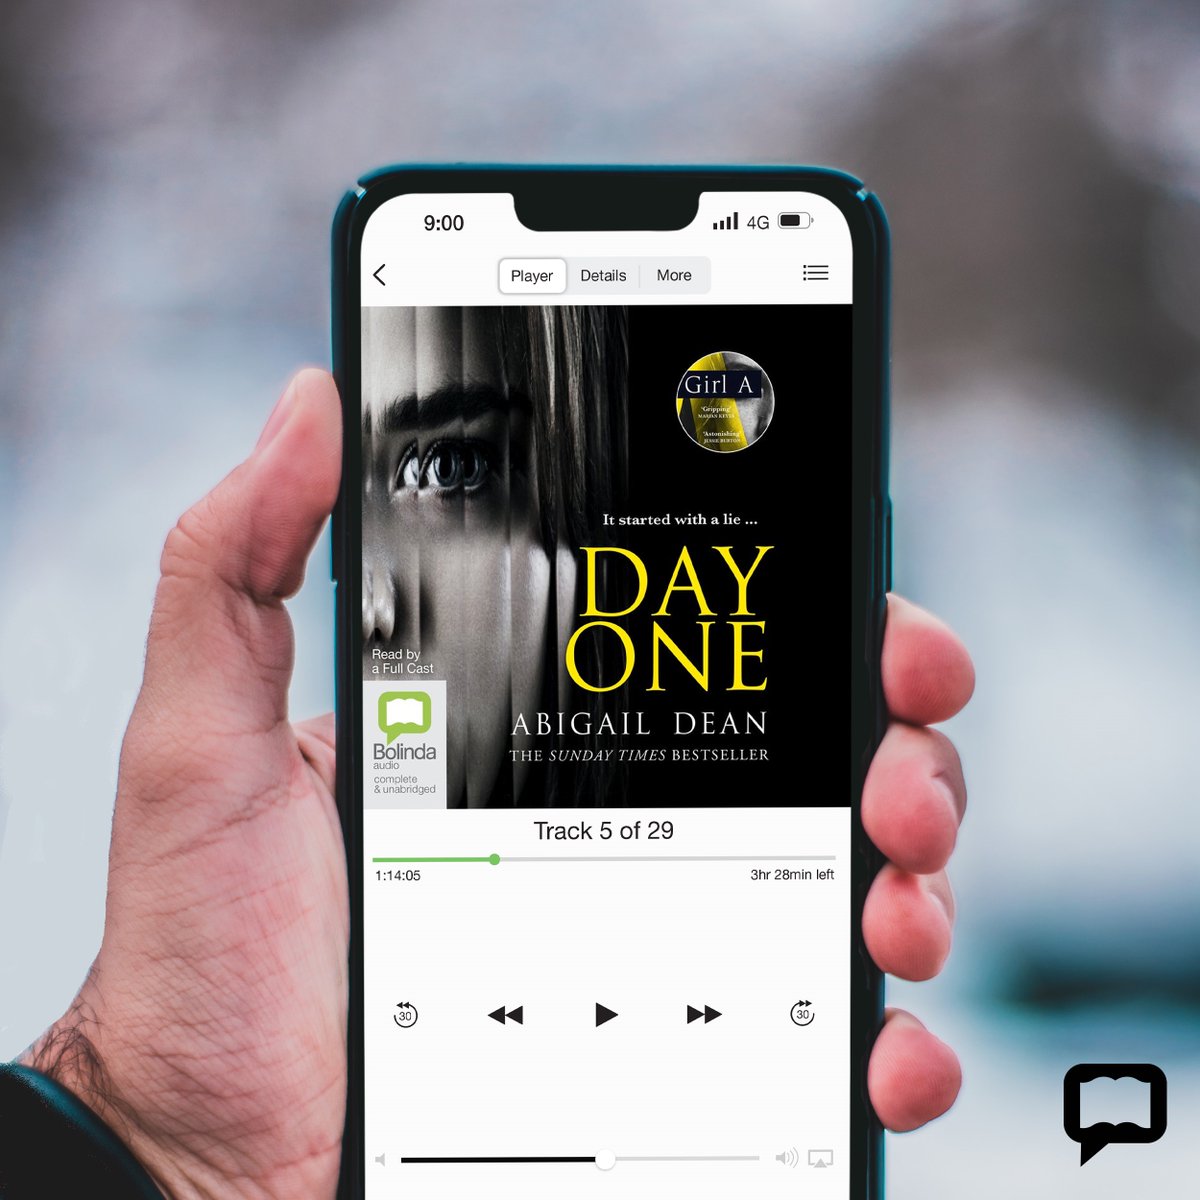 Spread the Word - Day One by Abigail Dean on BorrowBox! A heart-stopping tragedy, a beautiful Lake District town left shattered, and questions long unanswered – discover Day One – the extraordinary new release from bestselling author Abigail Dean. Find it now, on @BorrowBox!